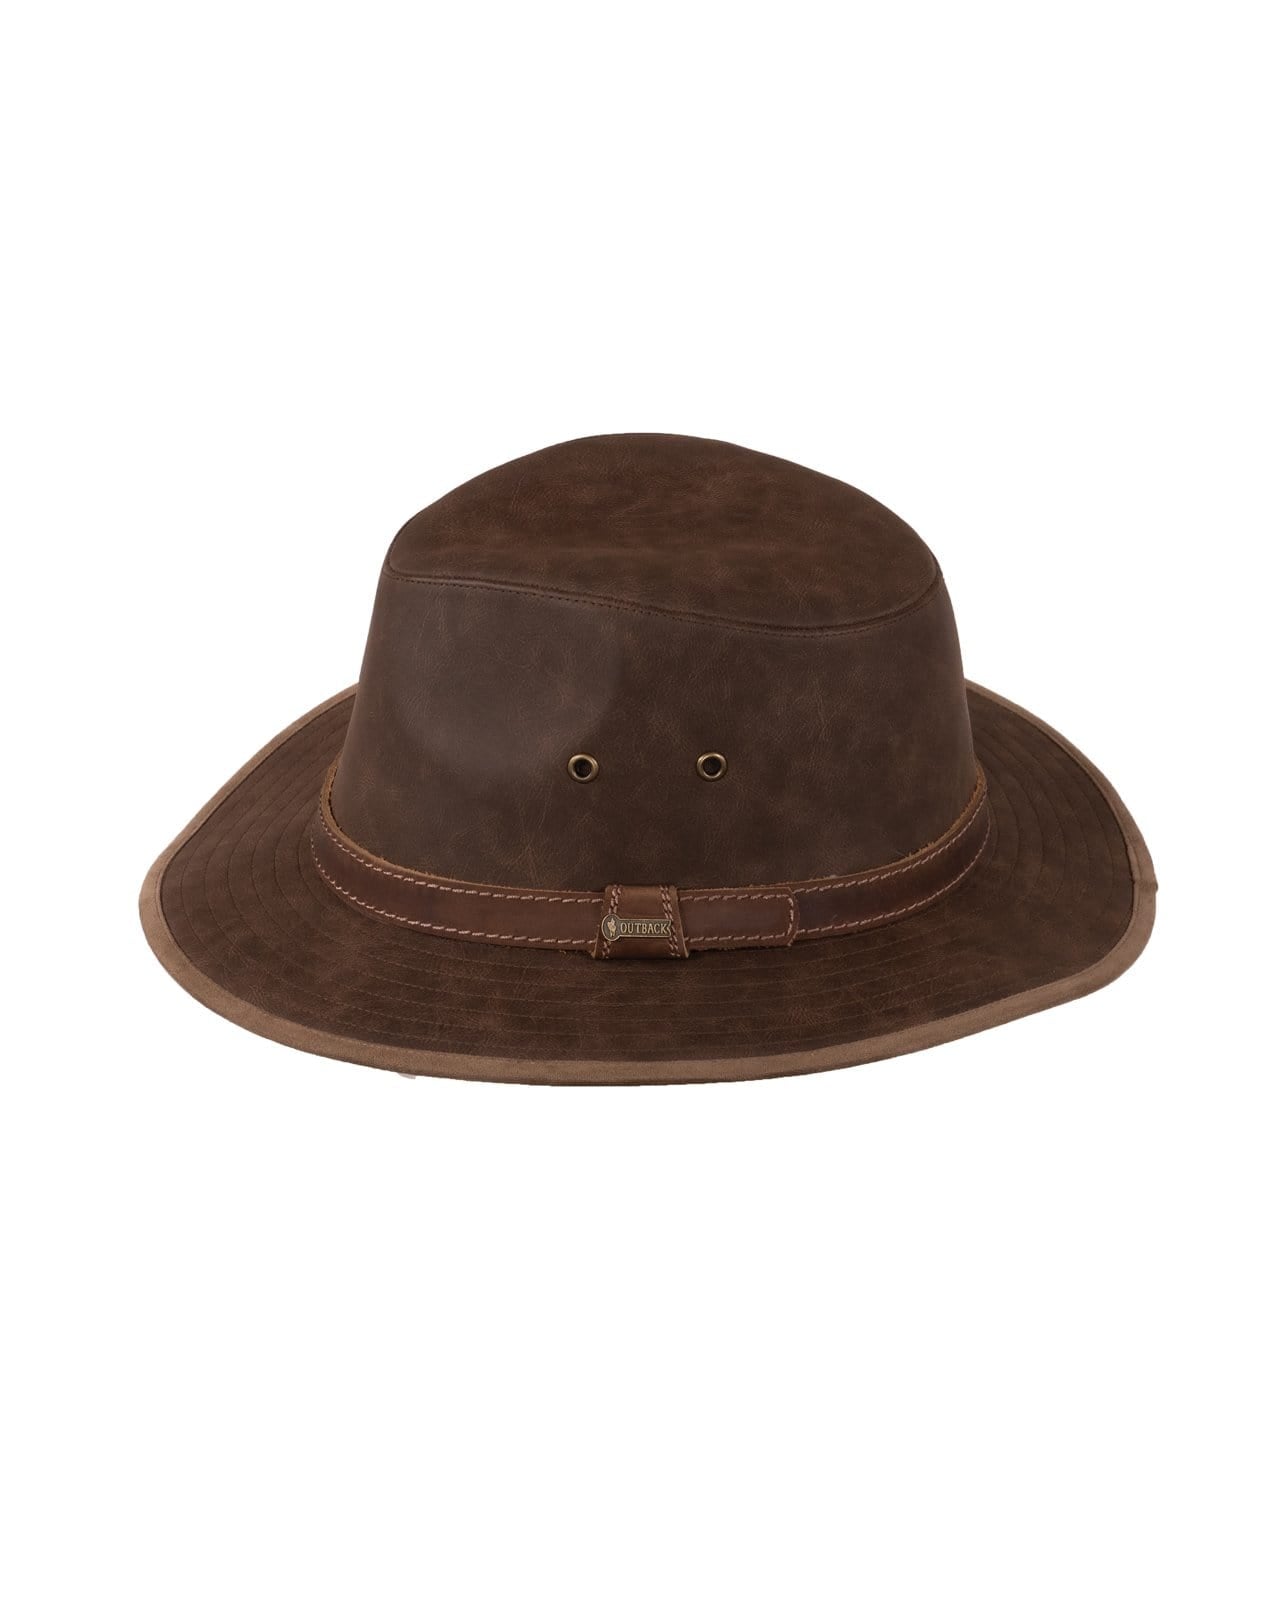 Outback Trading Company Raven Hats